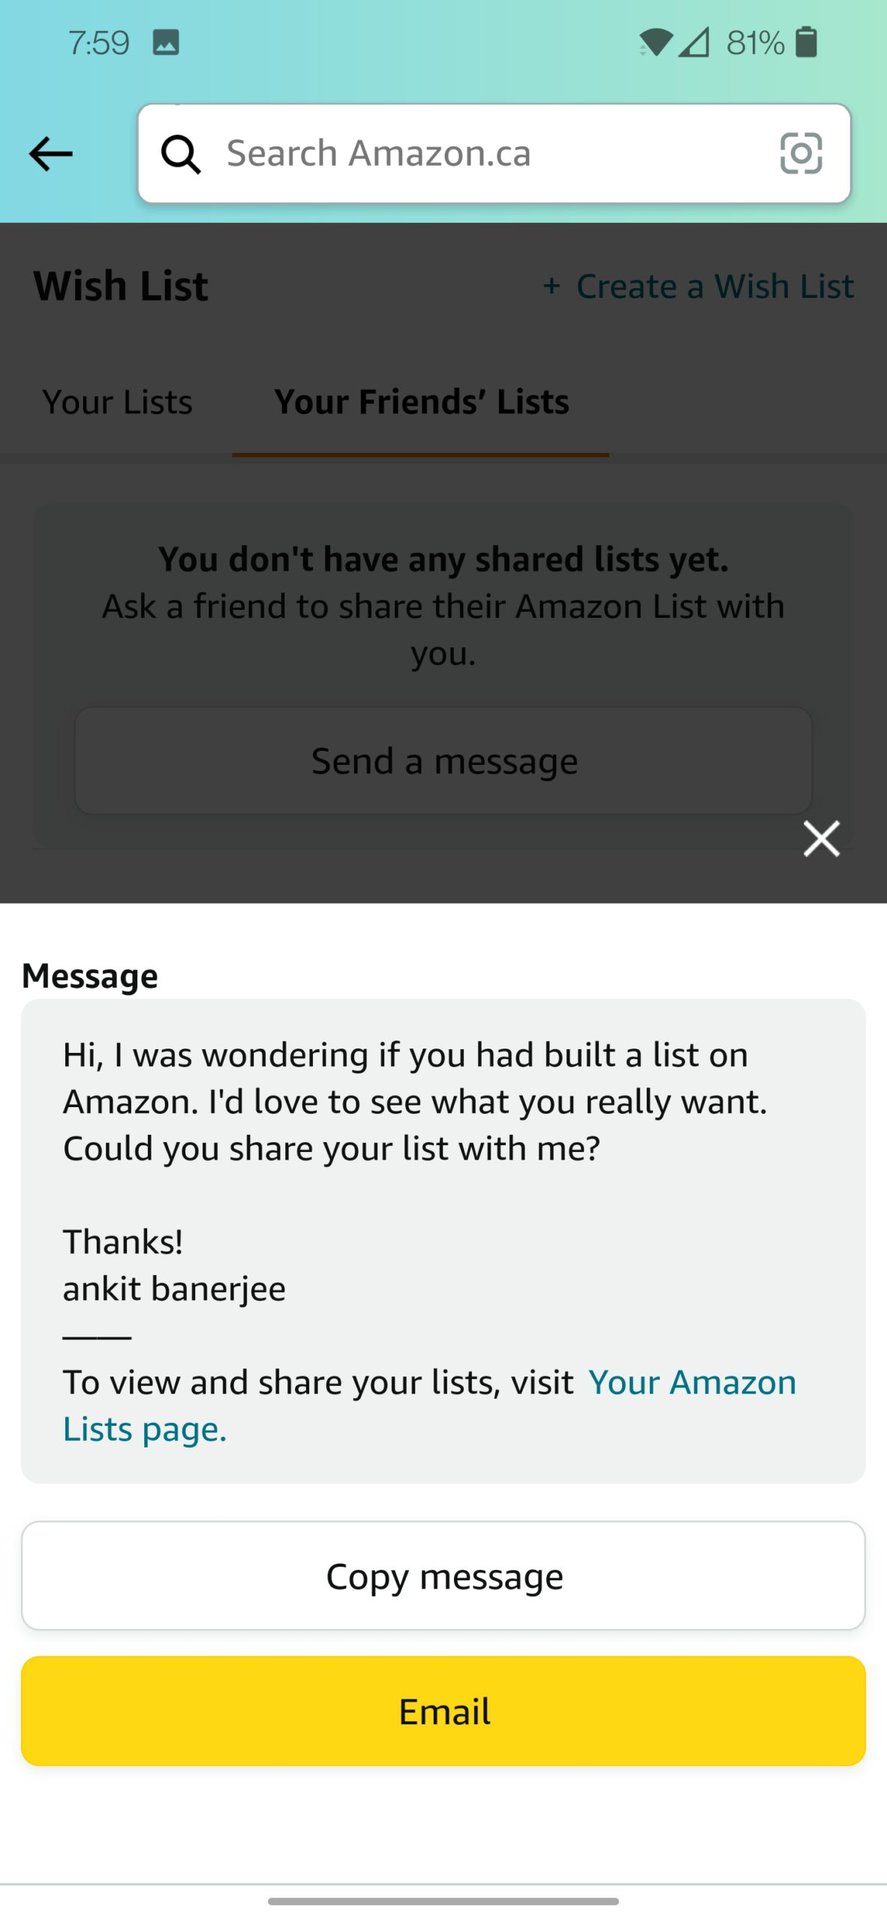 amazon app send message to ask for wishlist